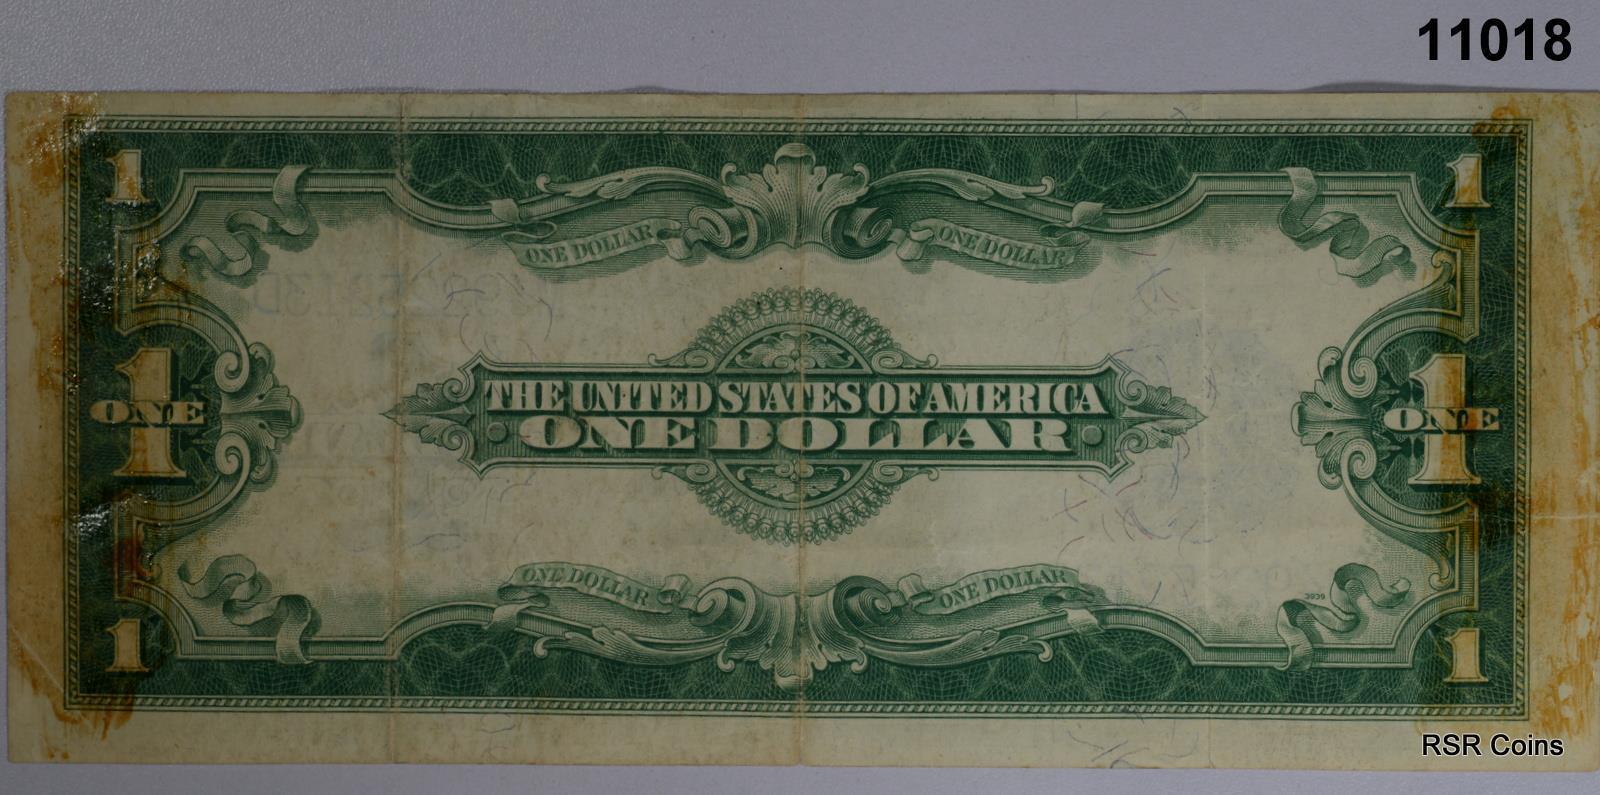 1923 $1 SILVER CERTIFICATE HORSE BLANKET REVERSE STAINS VF++! #11018